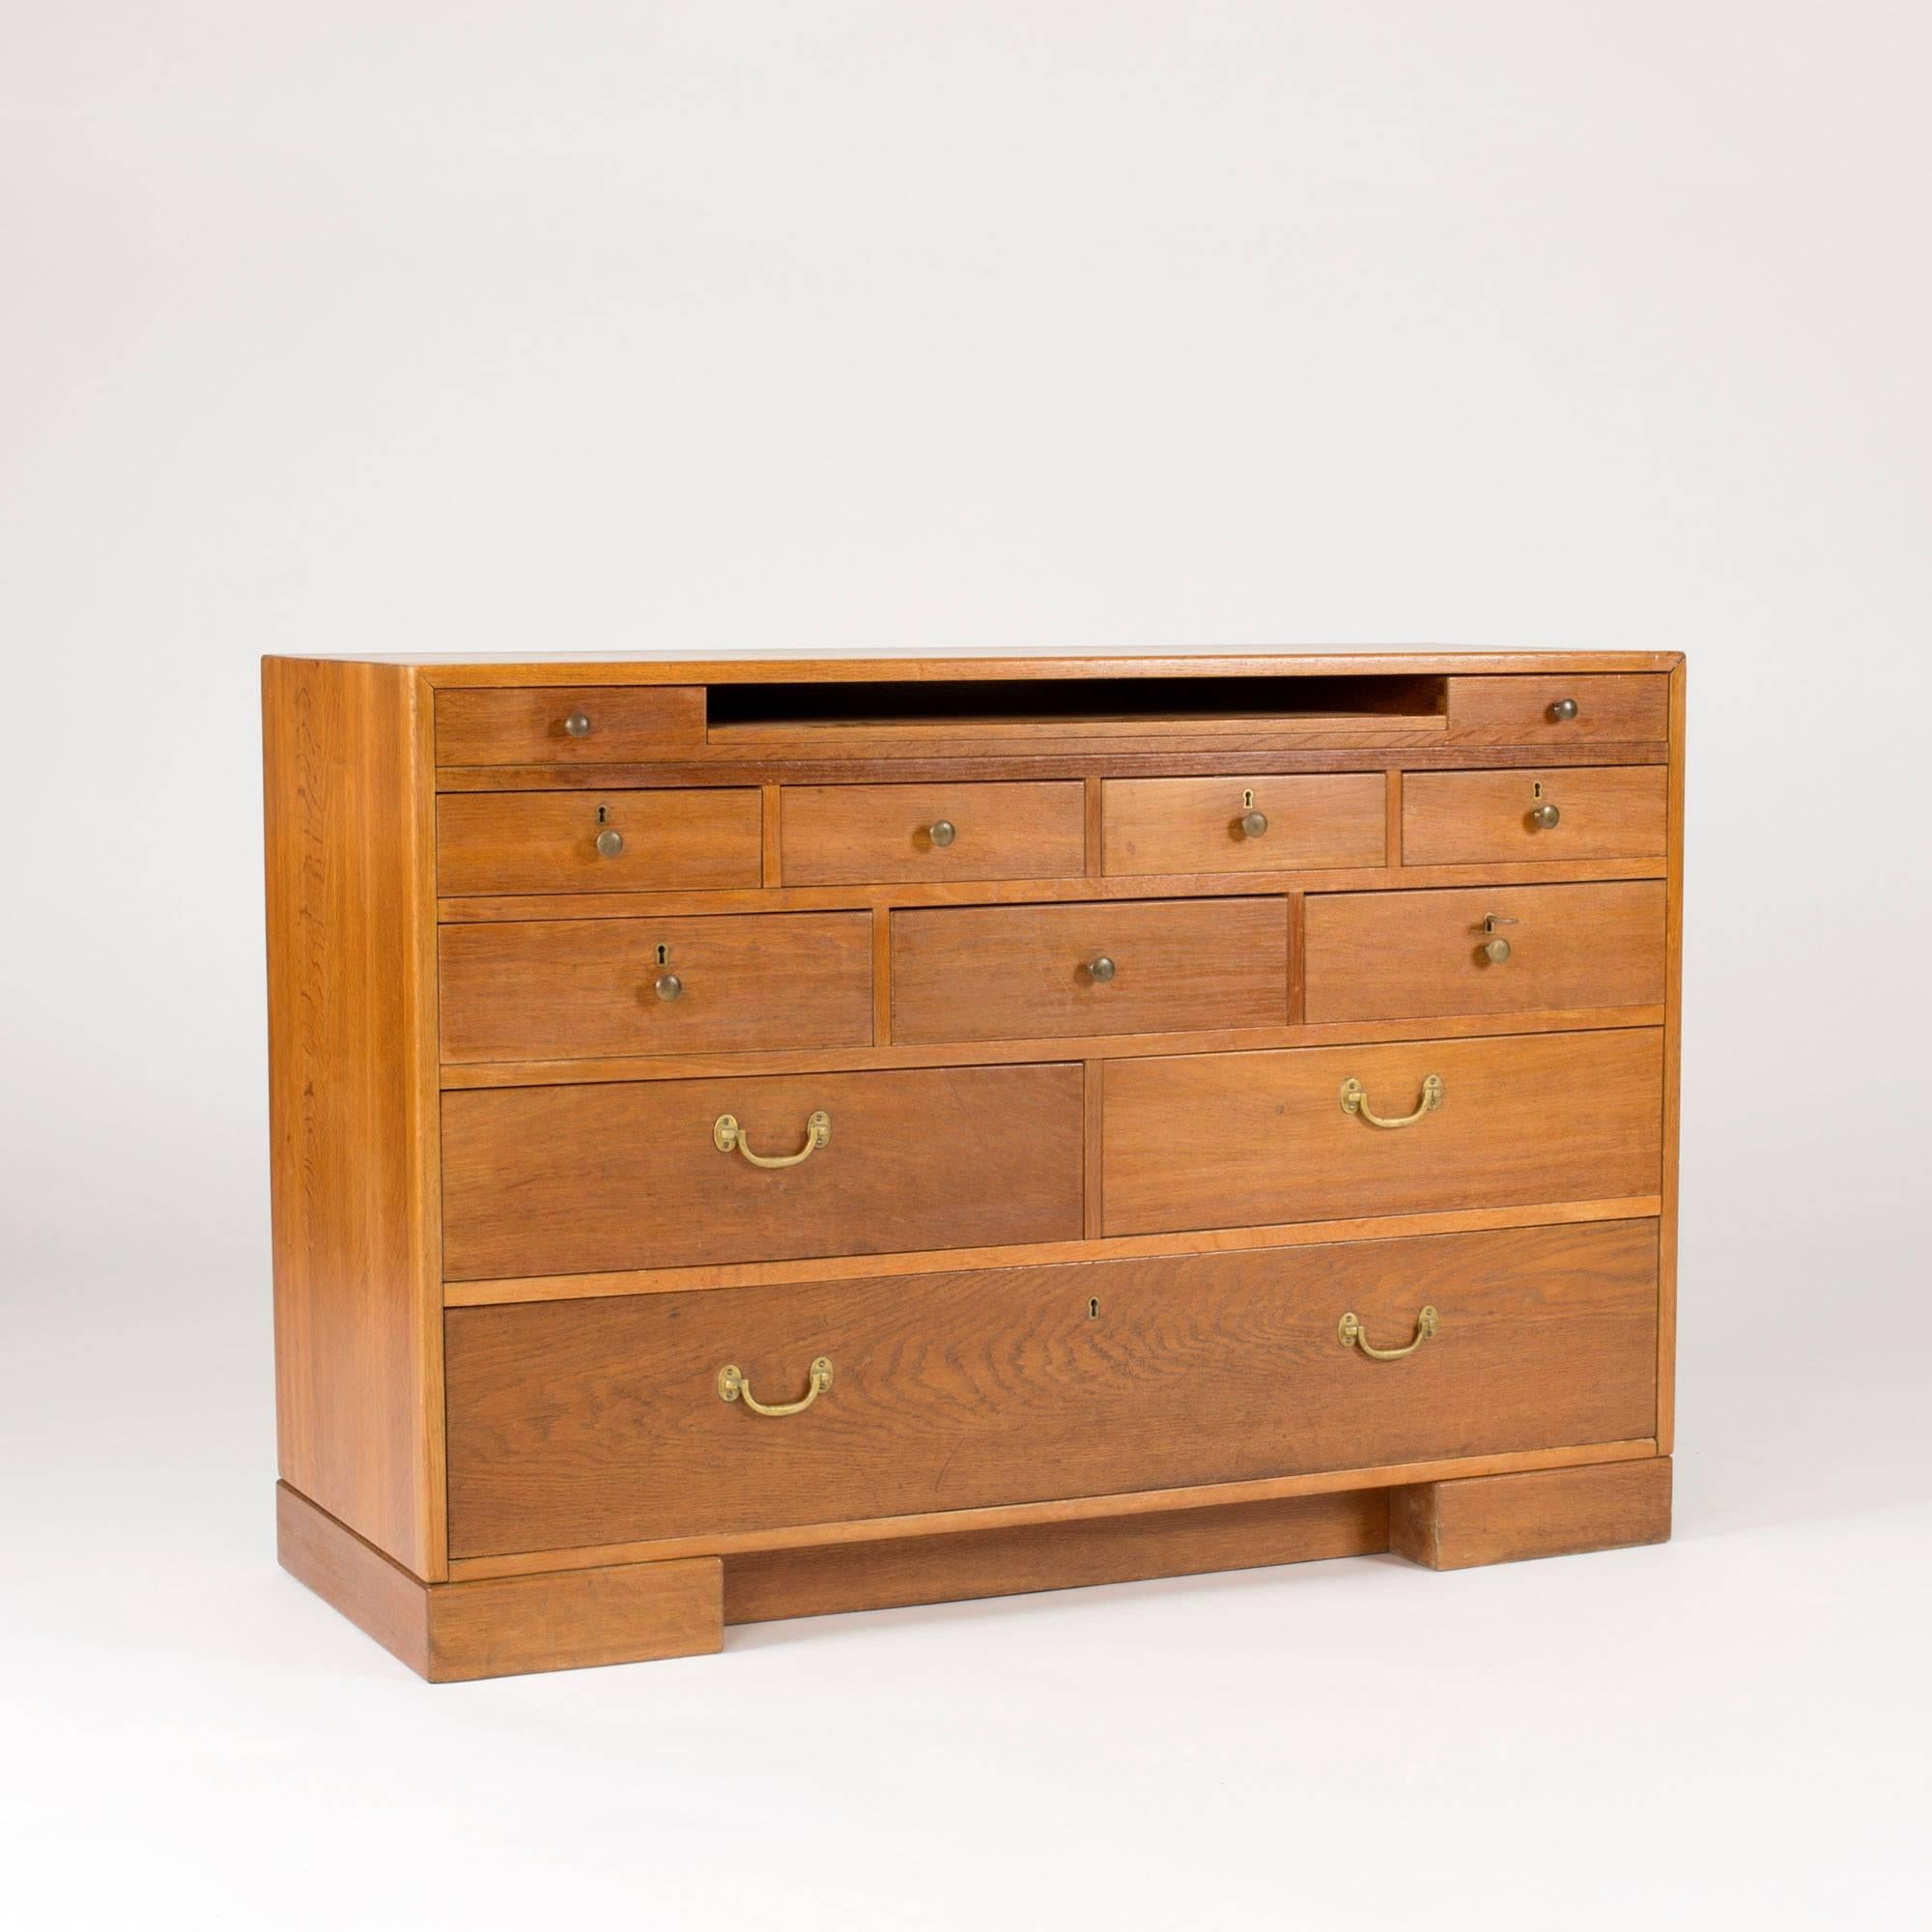 Rare secretaire by Mogens Koch, made in 1936 in a very limited edition for the Sønderborg Statshospital in Denmark, which he designed. Solid oak with brass handles and knobs. Extendable writing leaf dressed with leather and drawers covered by lids.